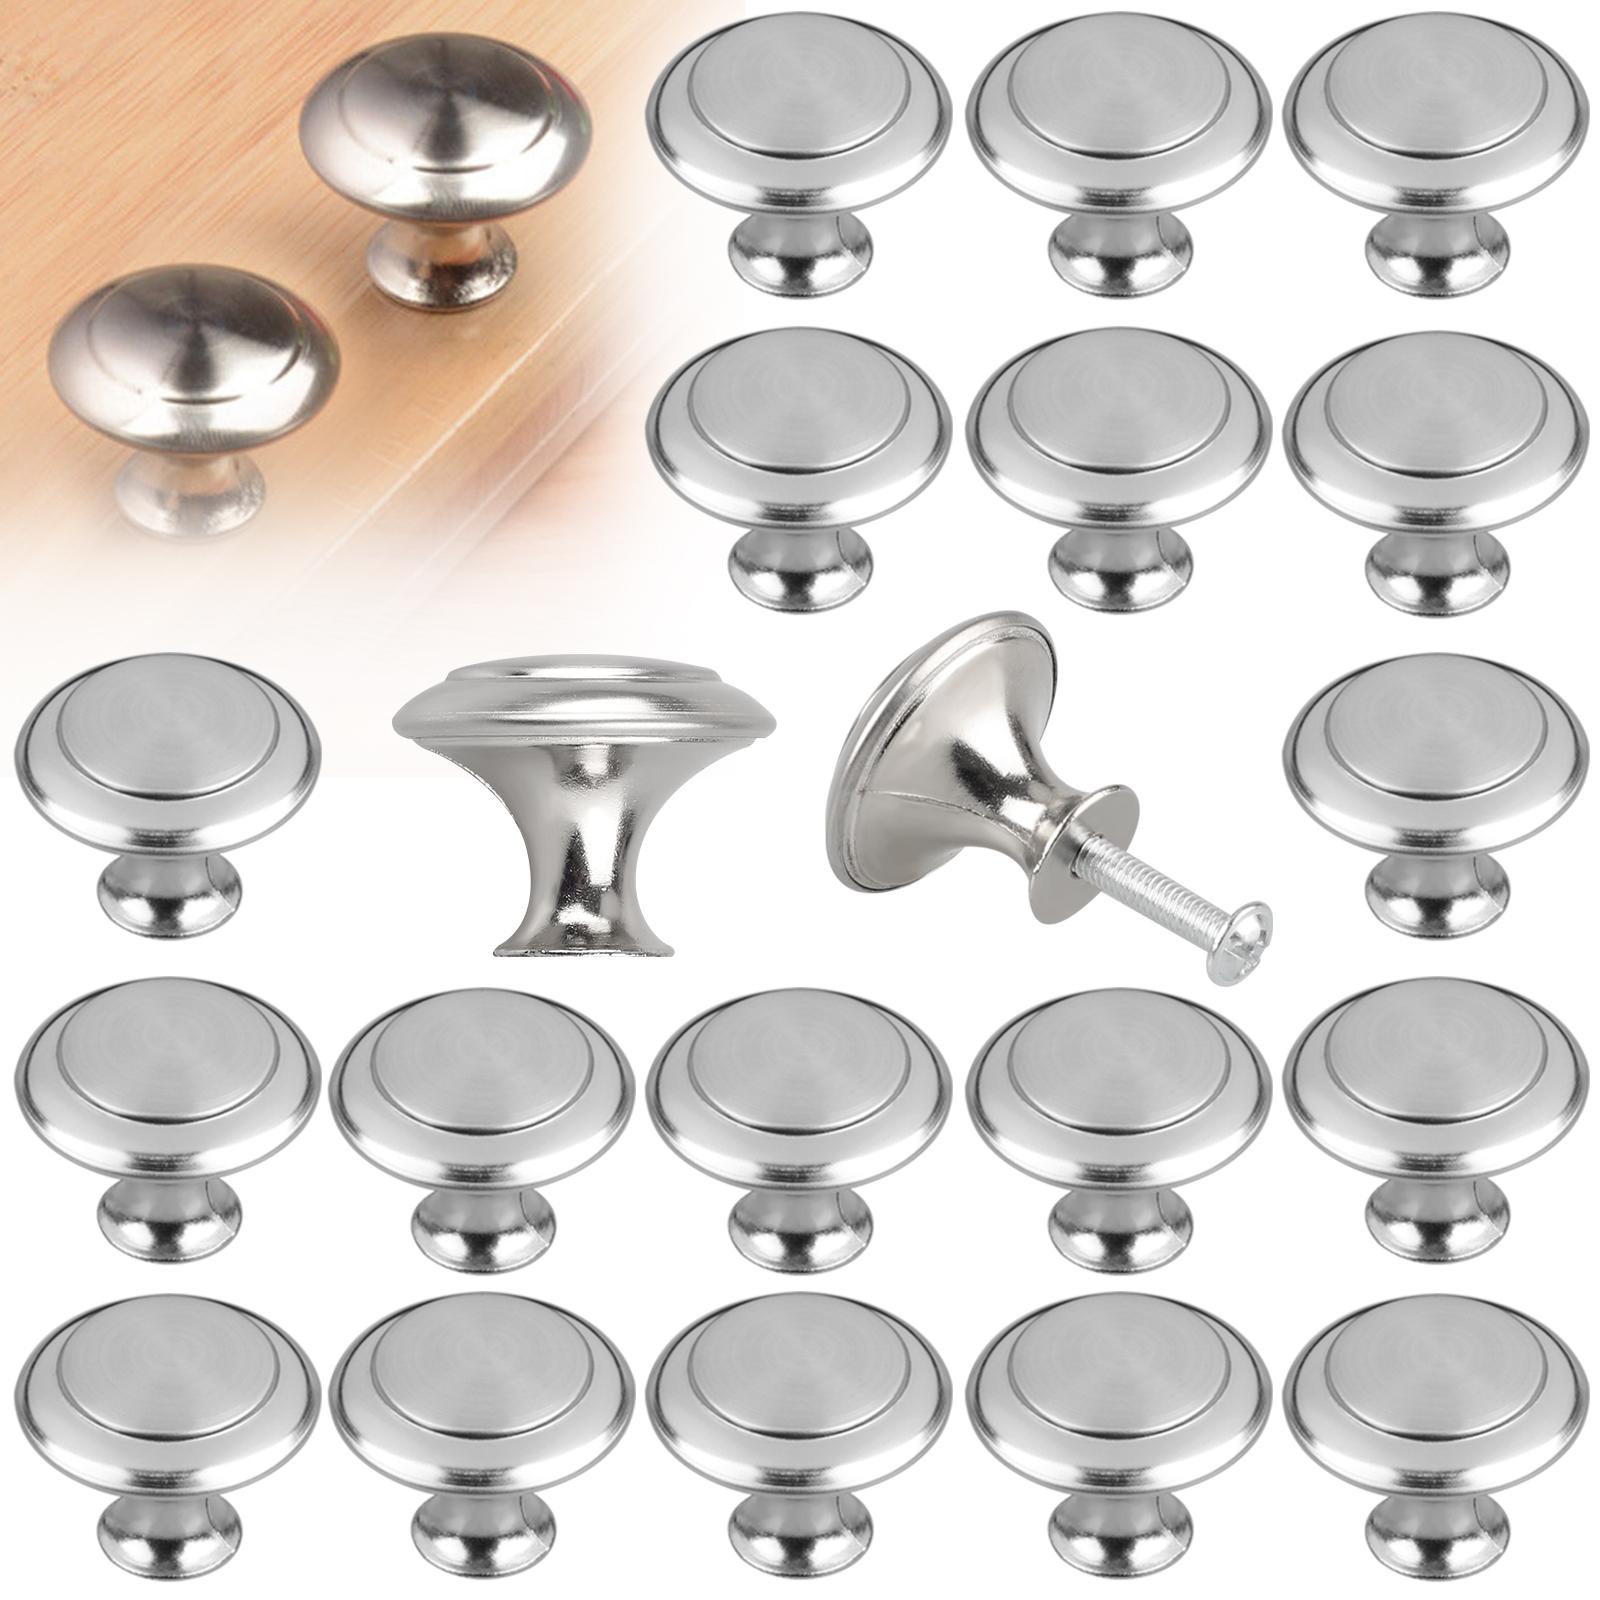 20pcs Kitchen Cabinet Heavy Pull Knobs, Brushed Nickel Cabinet Knobs Cupboard Door Knobs Kitchen Hardware Round Pull Knobs for Bathroom Drawer, Silver - image 1 of 8